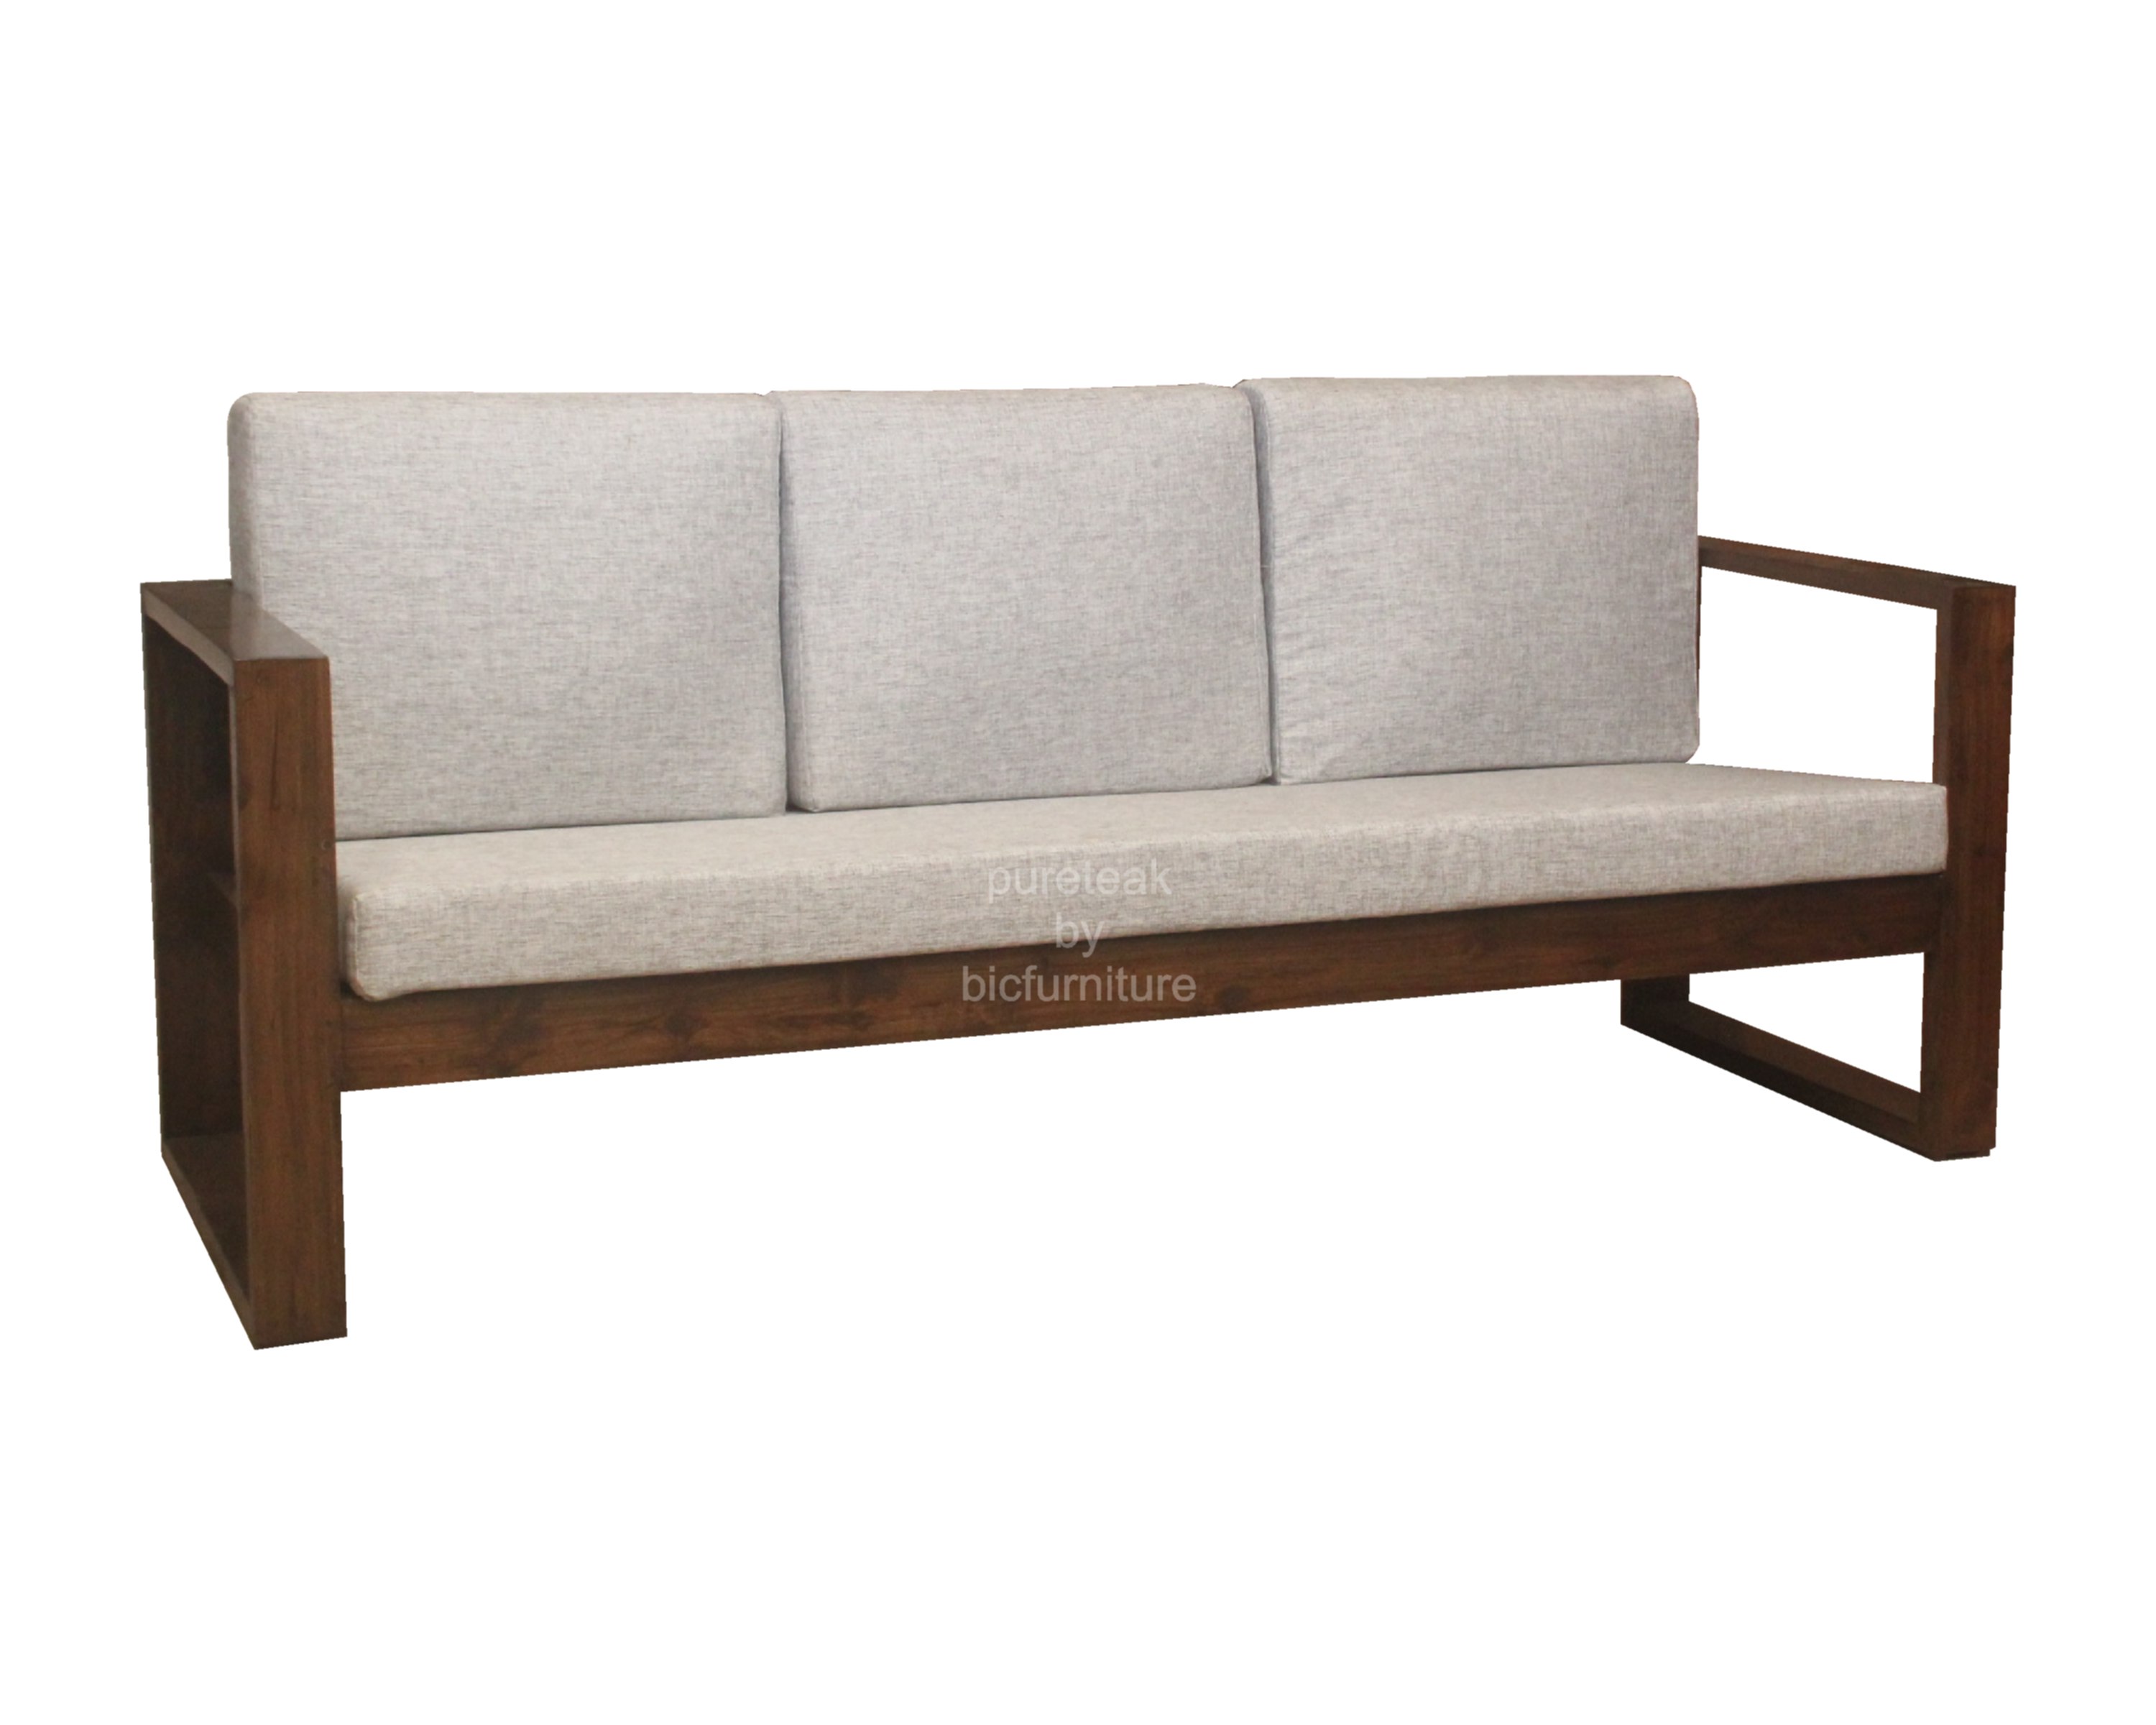 Wooden Sofa Set In Simple Design Ws 67, Wooden Sofa Set Designs With Dimensions